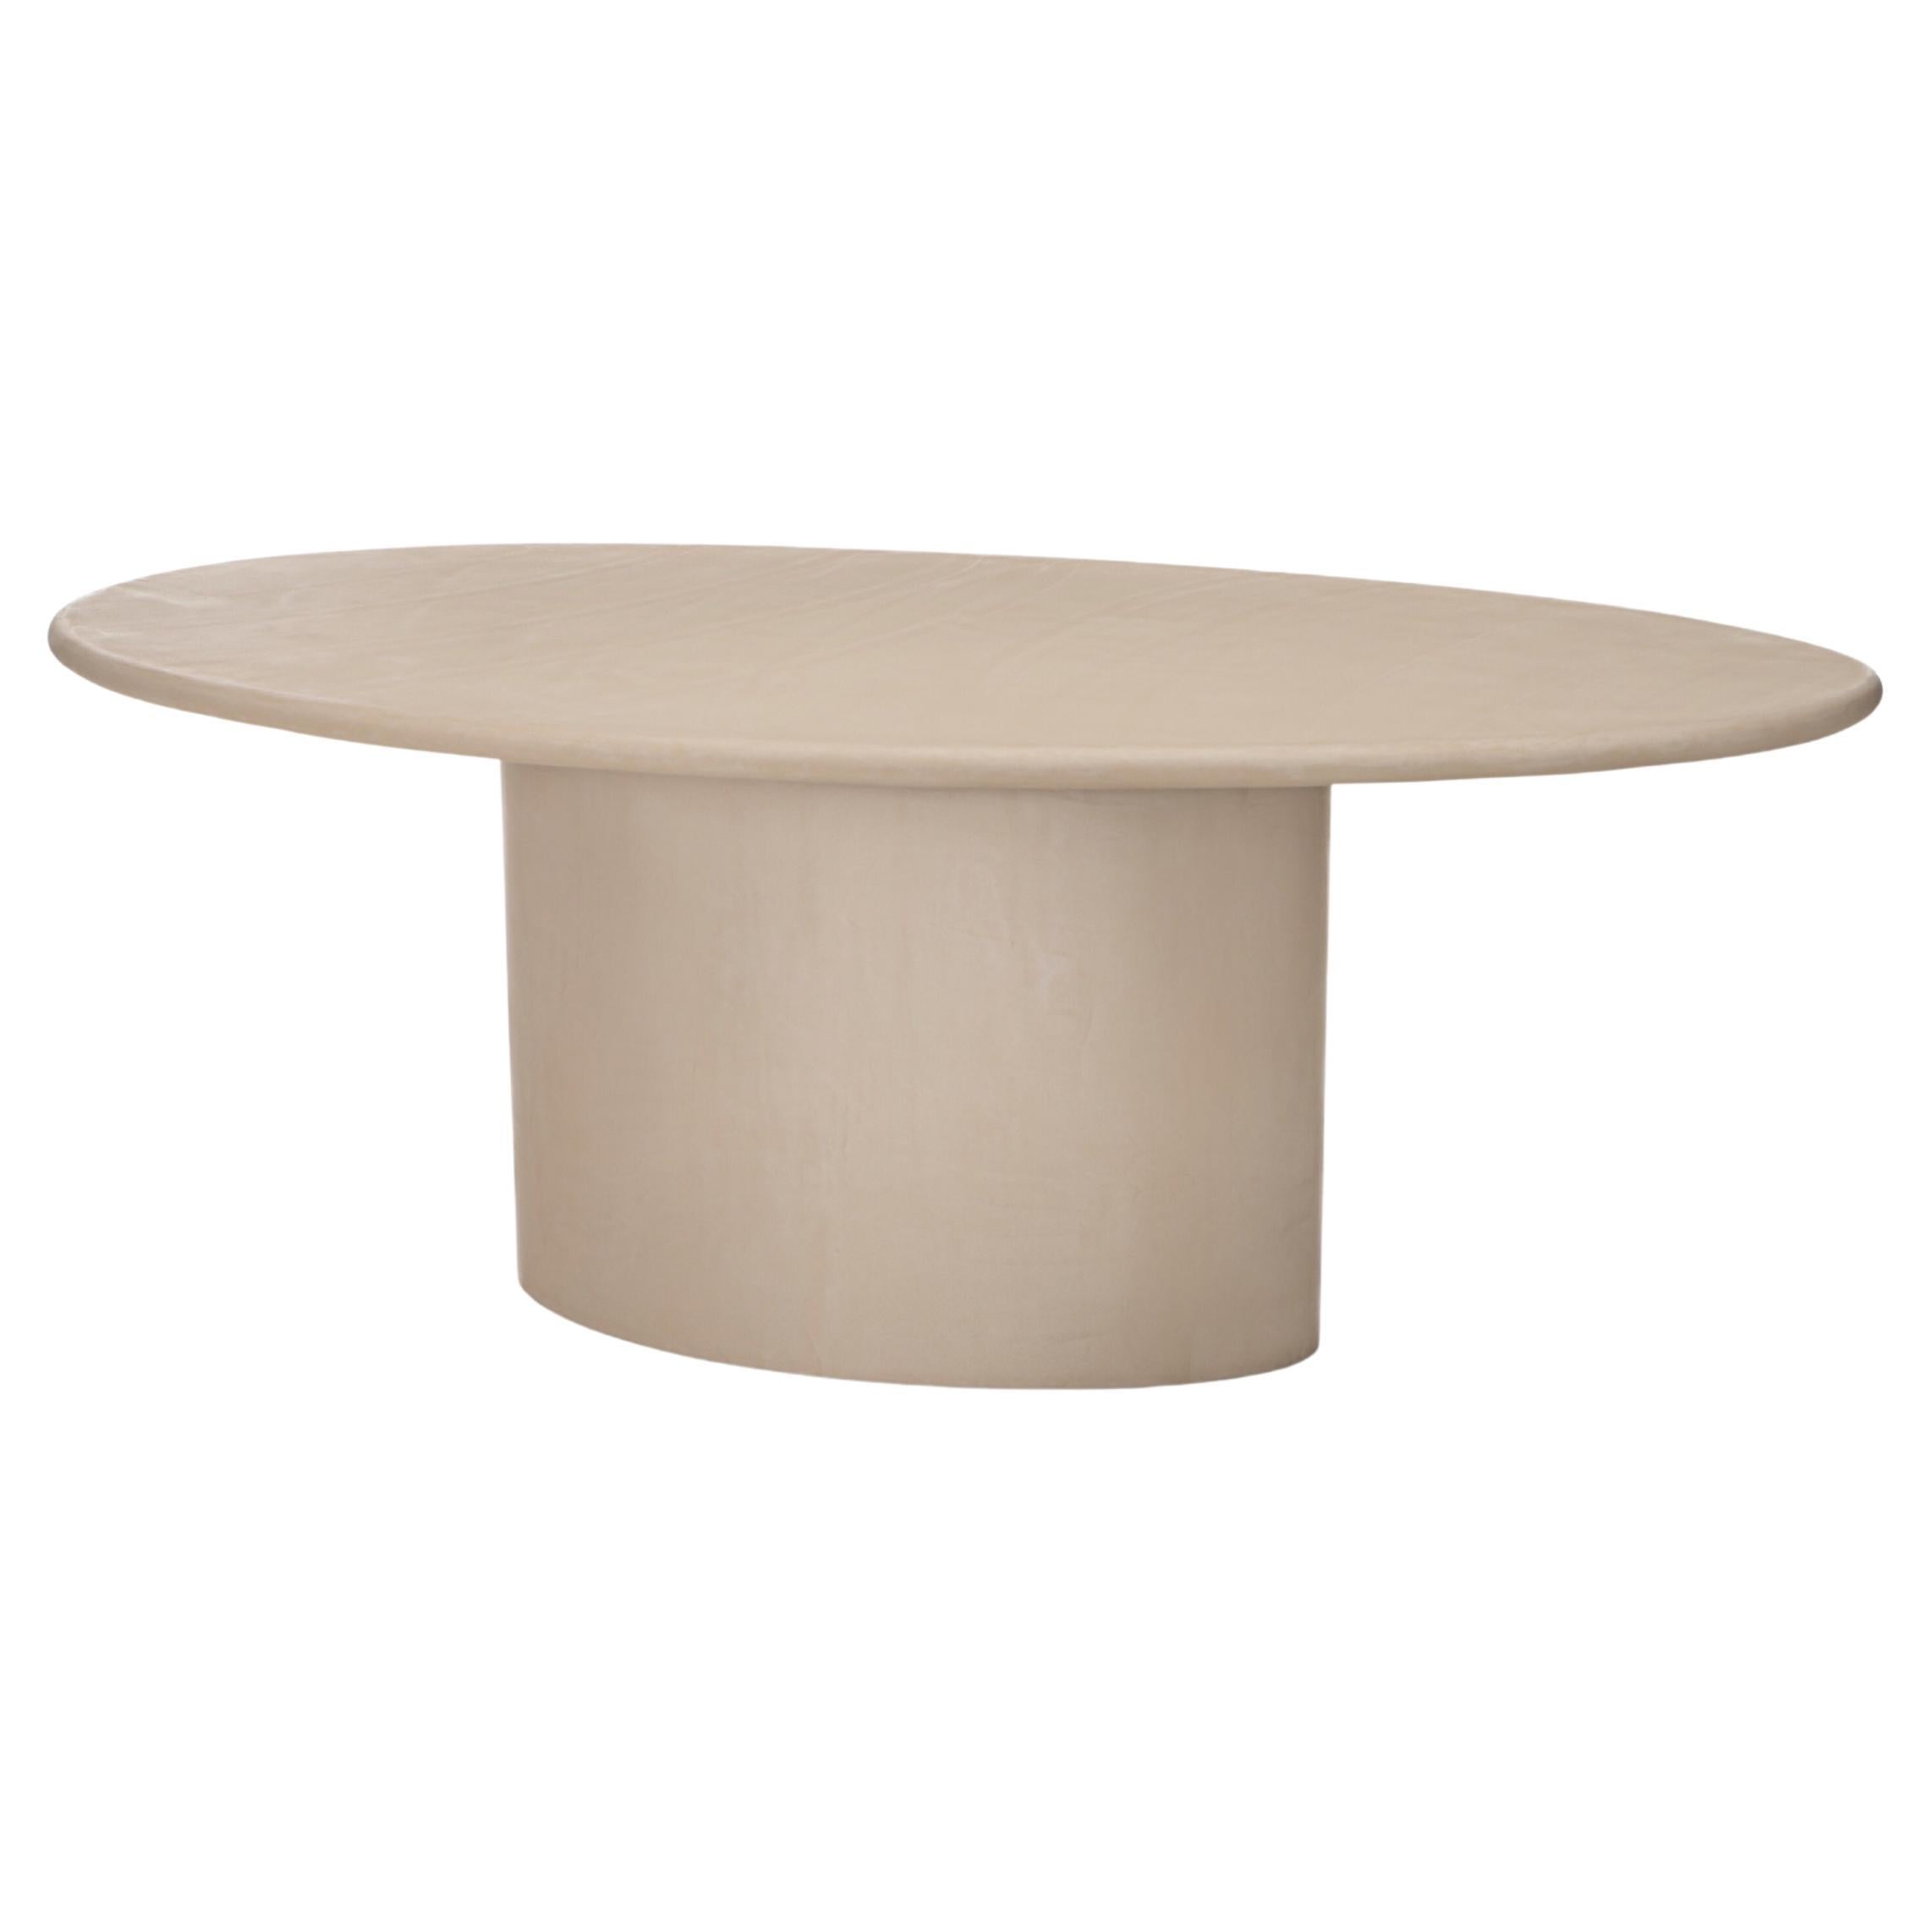 Organic Shaped Natural Plaster Dining Table "Sami" 200 by Isabelle Beaumont For Sale